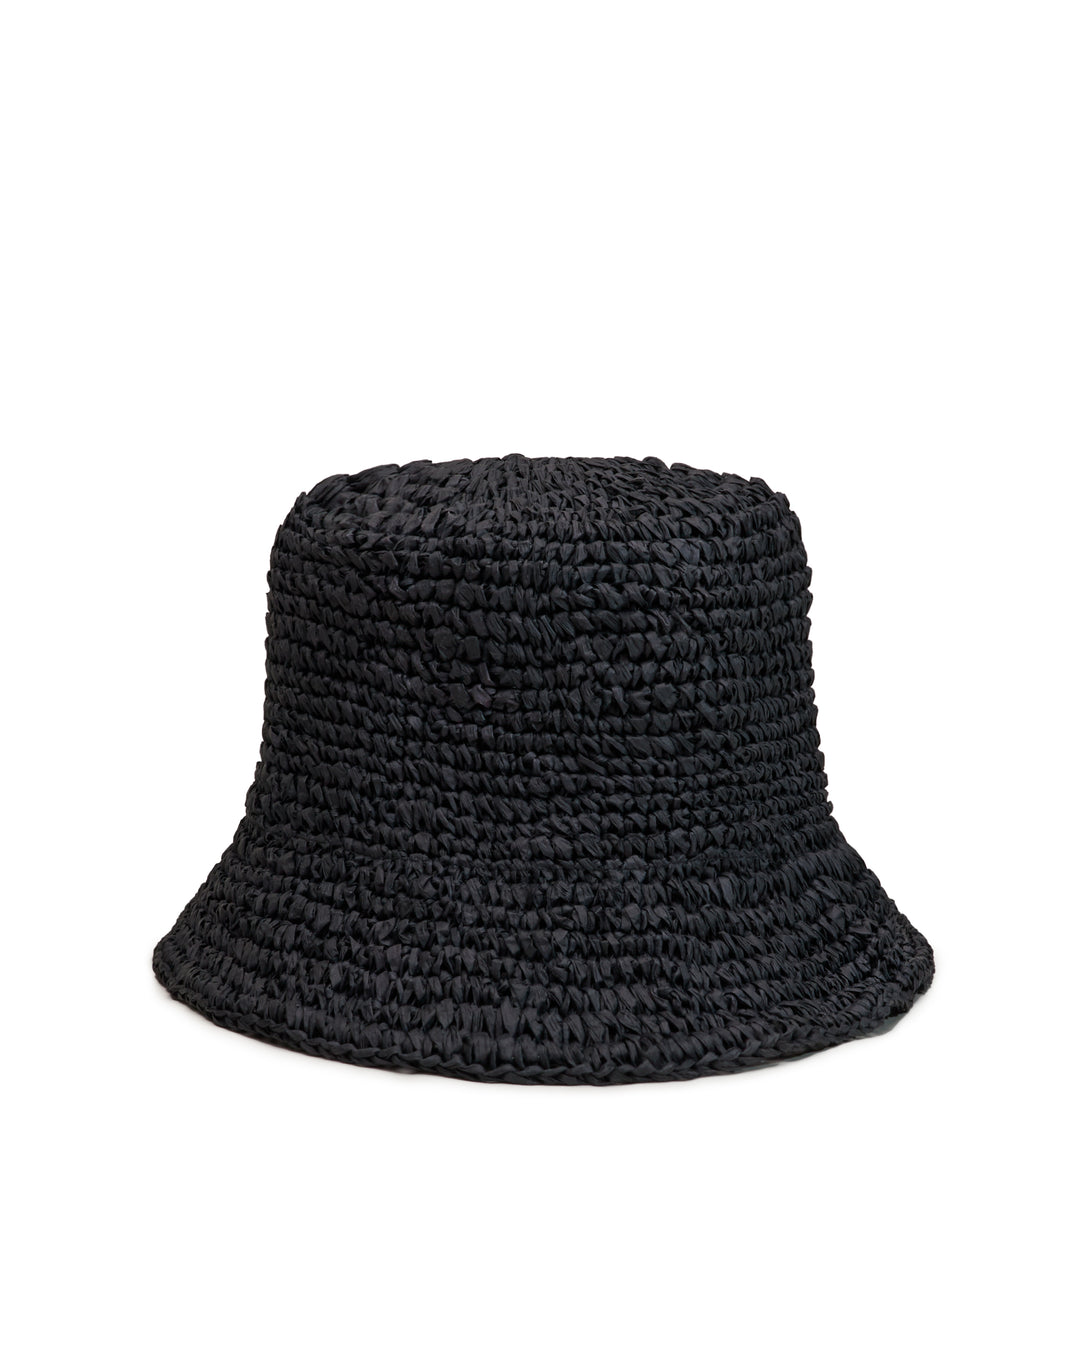 A black textured Dandy Del Mar Amabile Rafia Hat in Onyx isolated on a white background.